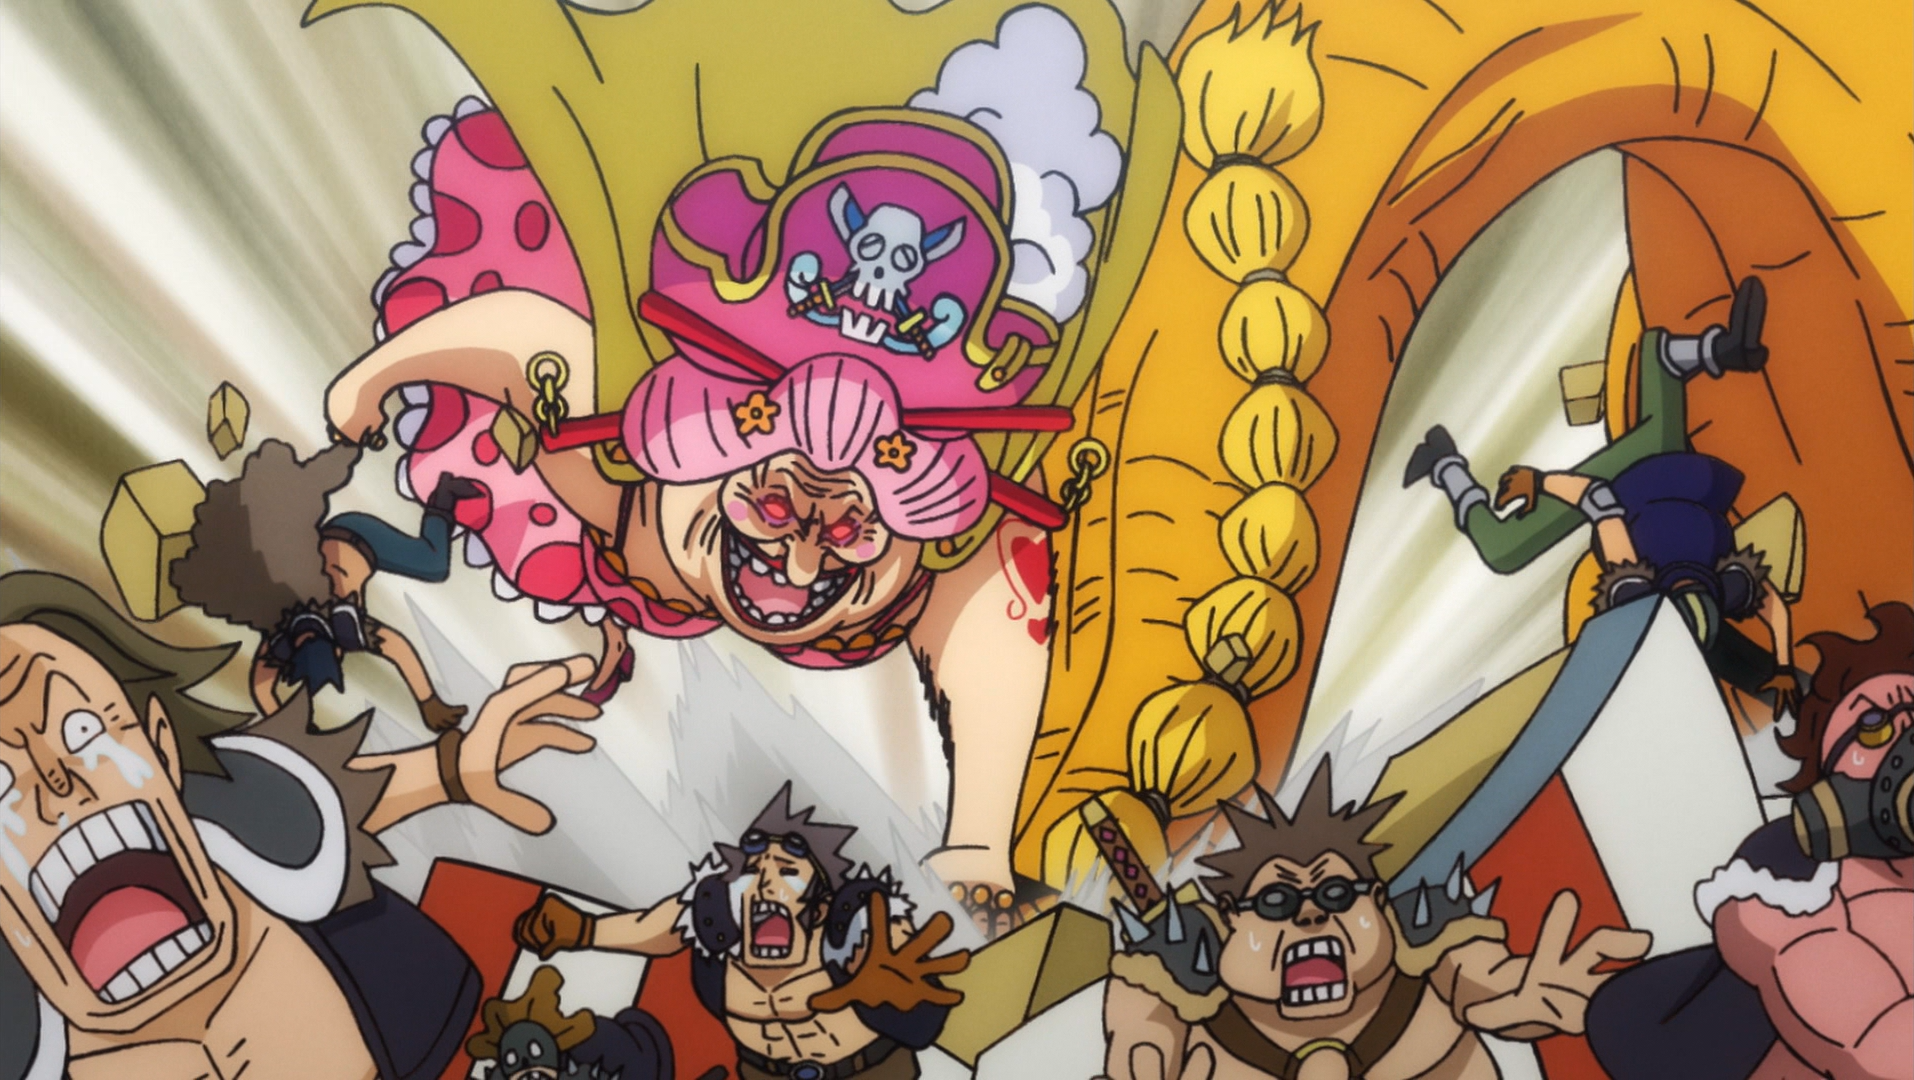 Pin by ARTHUR.B on One piece  One piece anime, One piece images, Big mom  pirates